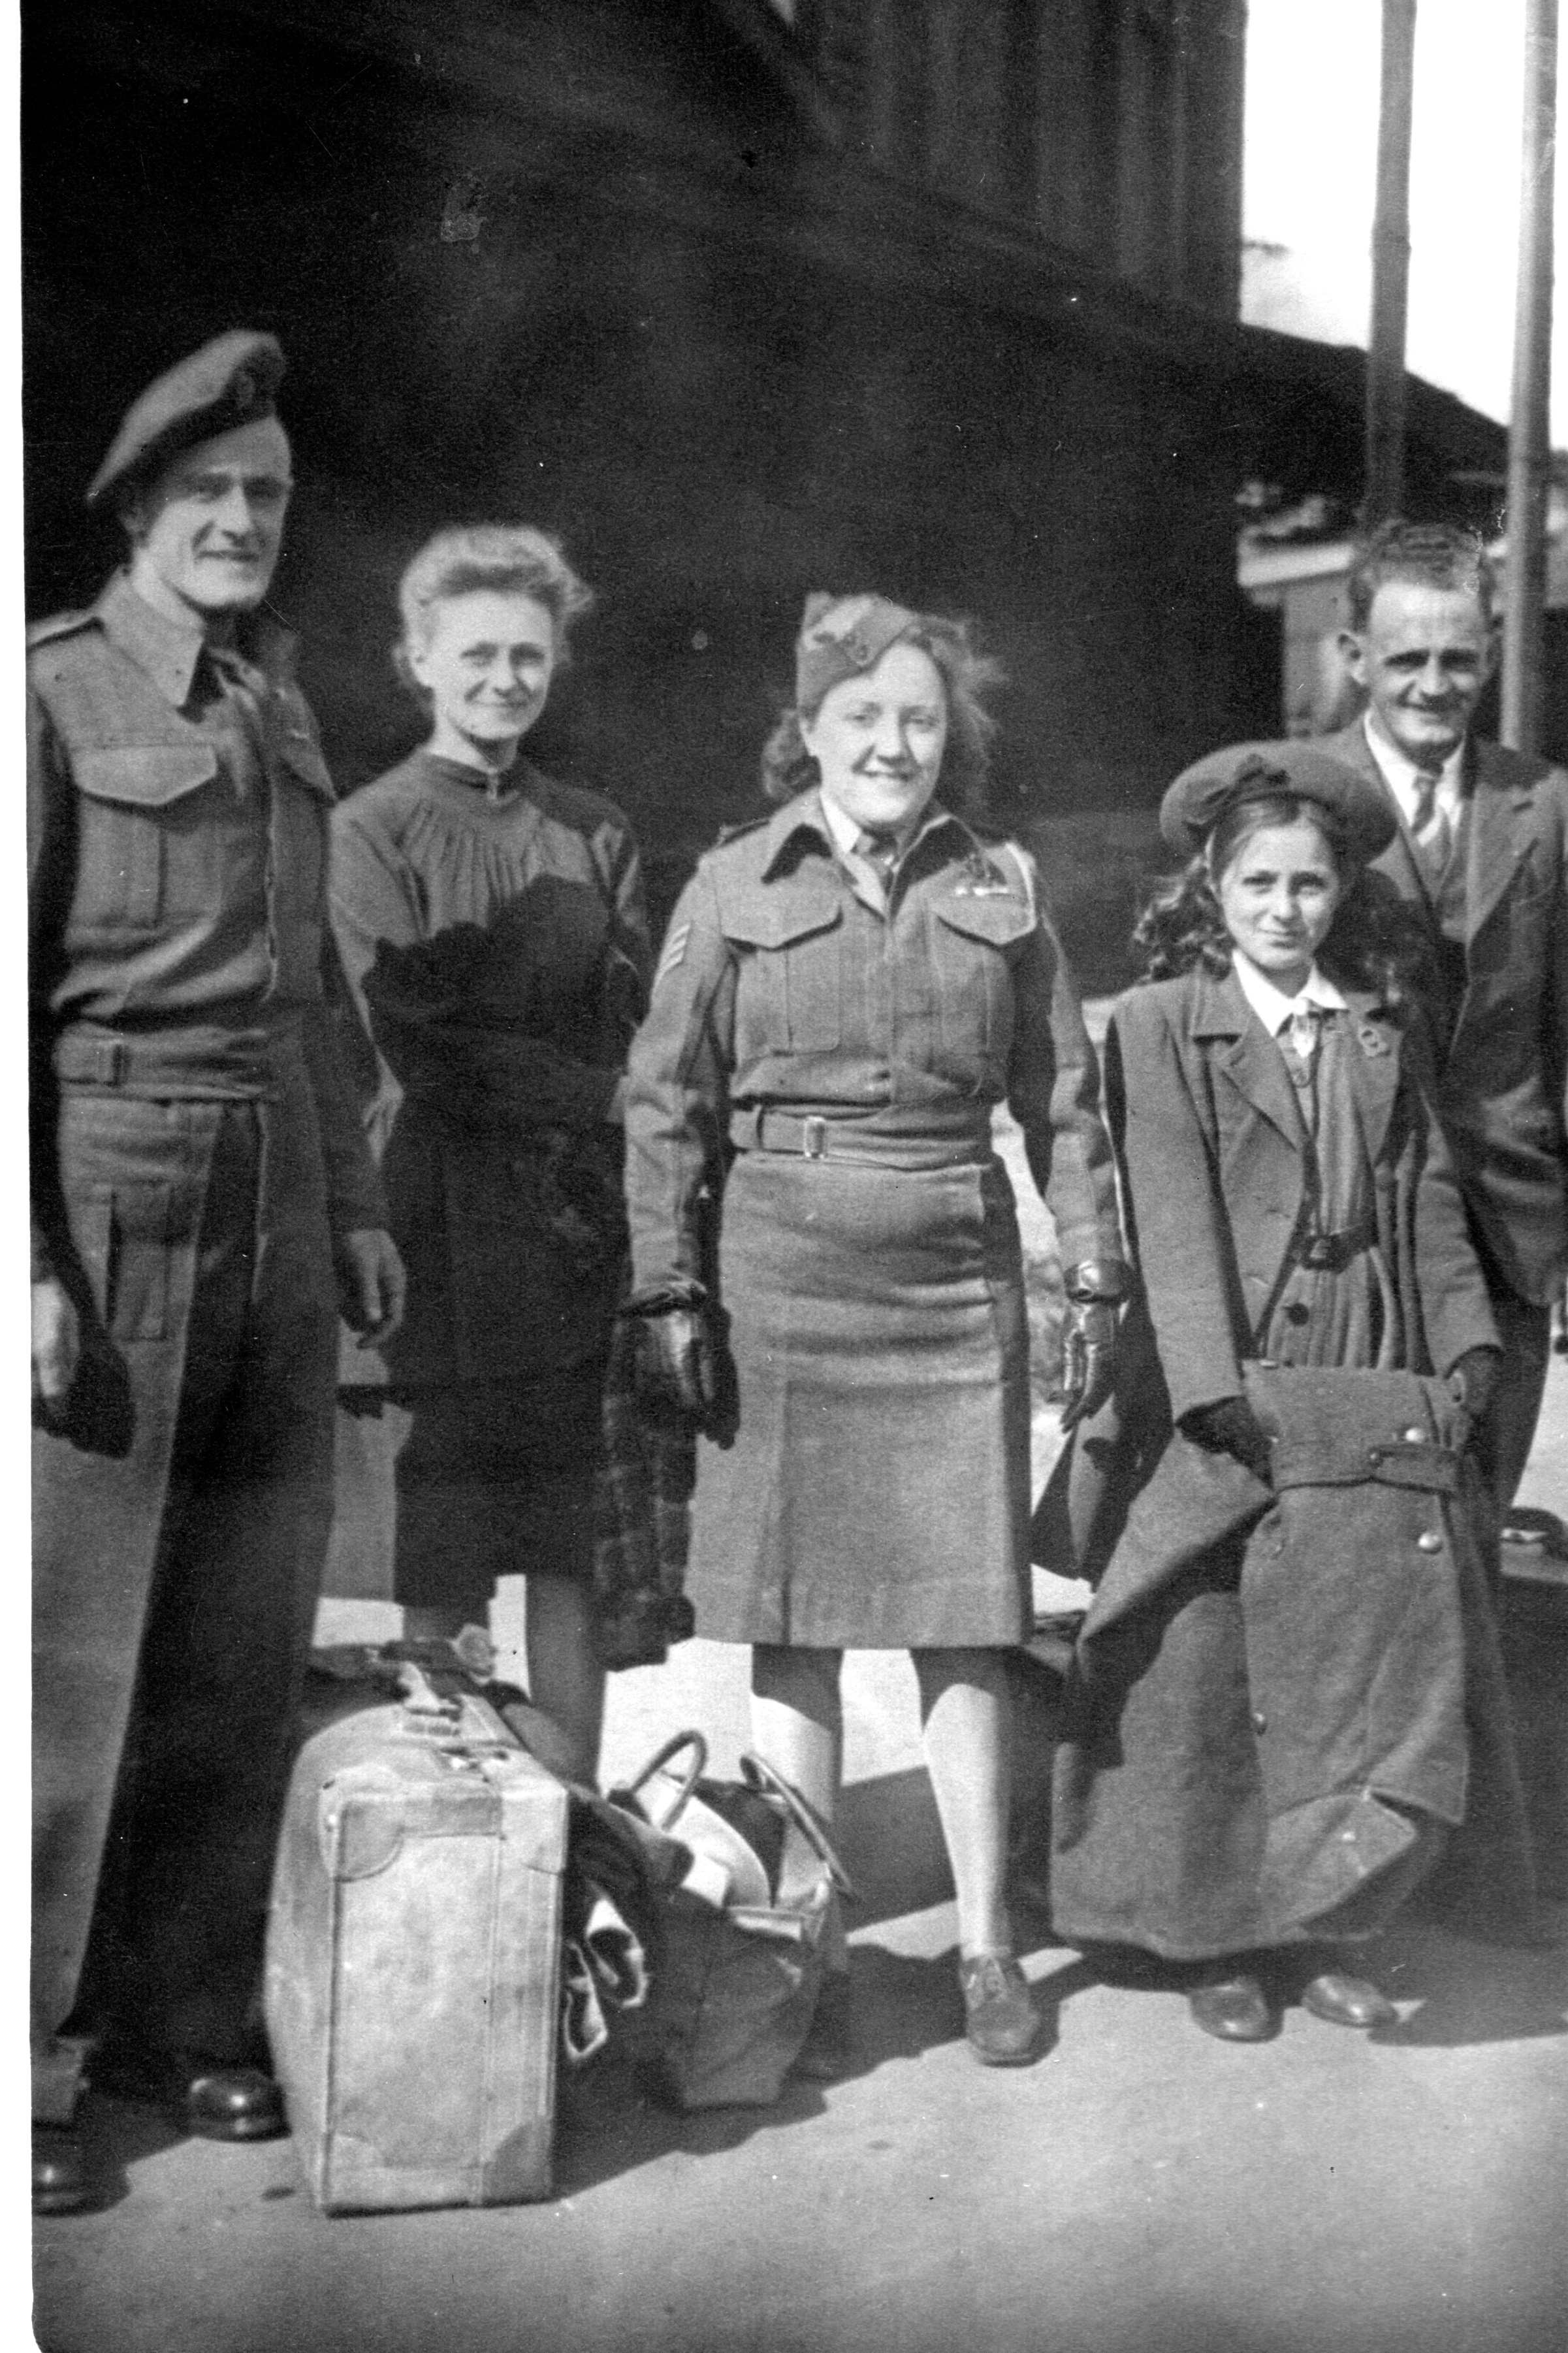 Phillip Thomas Clark, Beatrice Mary Clark, Aliston (Bert) and his two daughters – the blonde one is Phillis and the other is Pat.  It was taken the day that Phillip and Beatrice arrived in New Zealand on board the “Strathaird” which was the troop ship that bought them back from Egypt following the war – 7th September 1945.